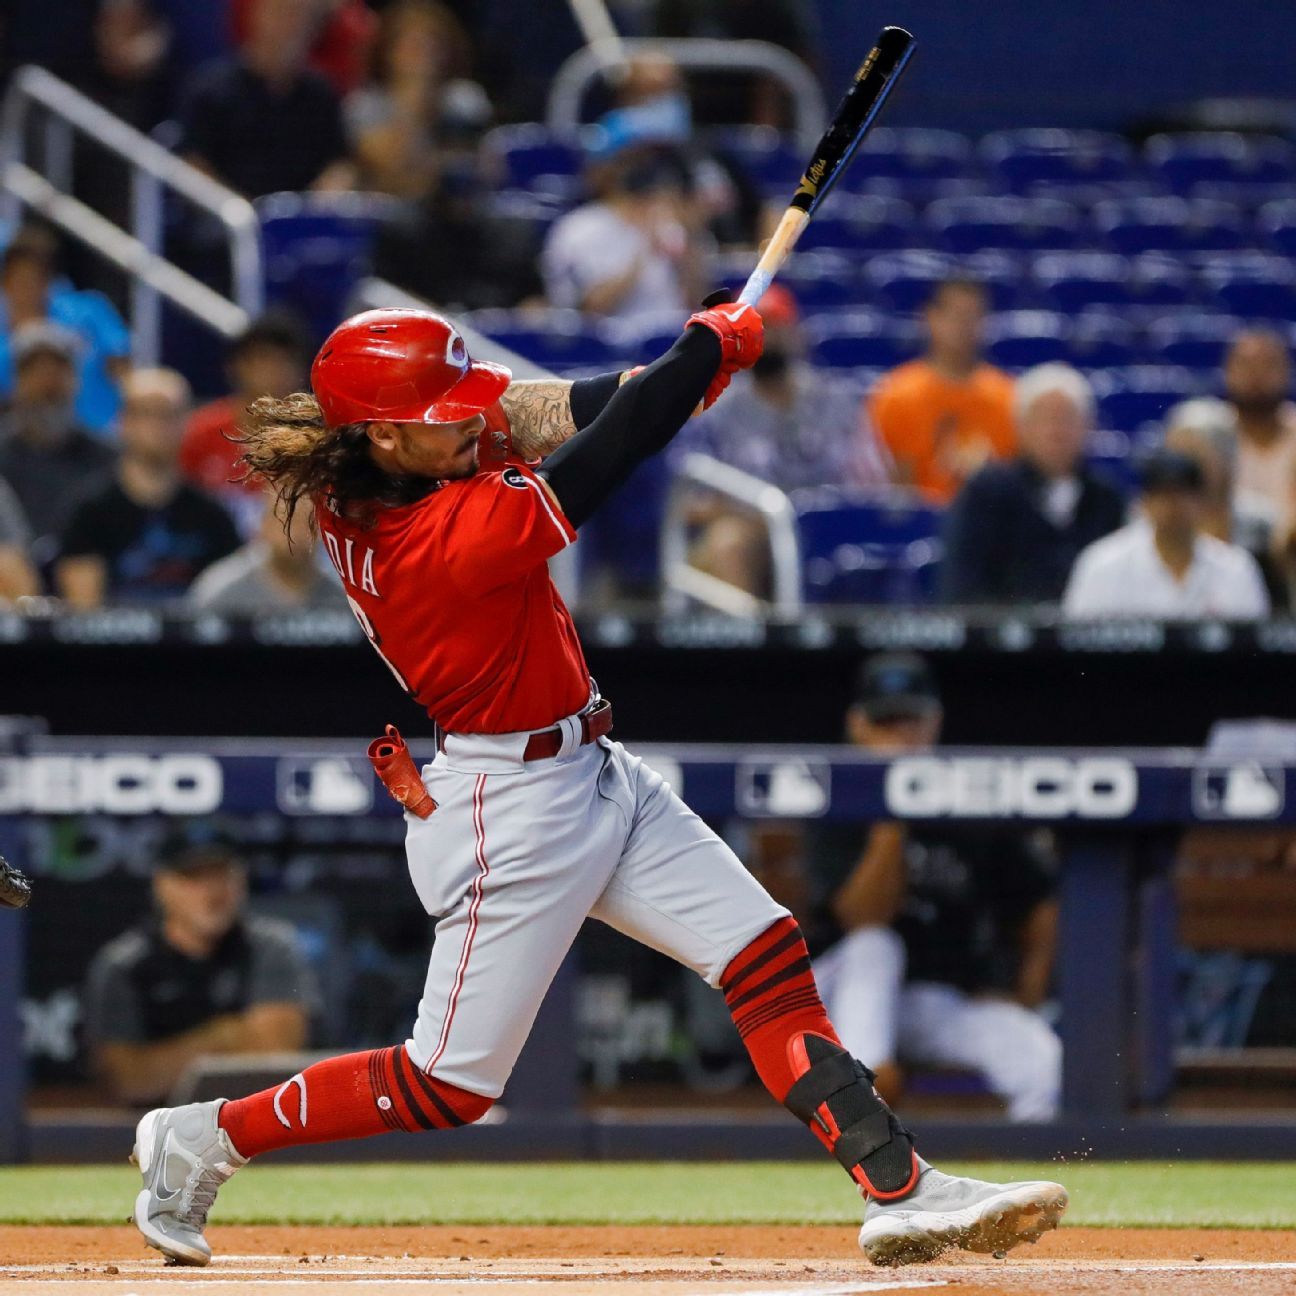 Reds 2B India, 24, named NL Rookie of the Year